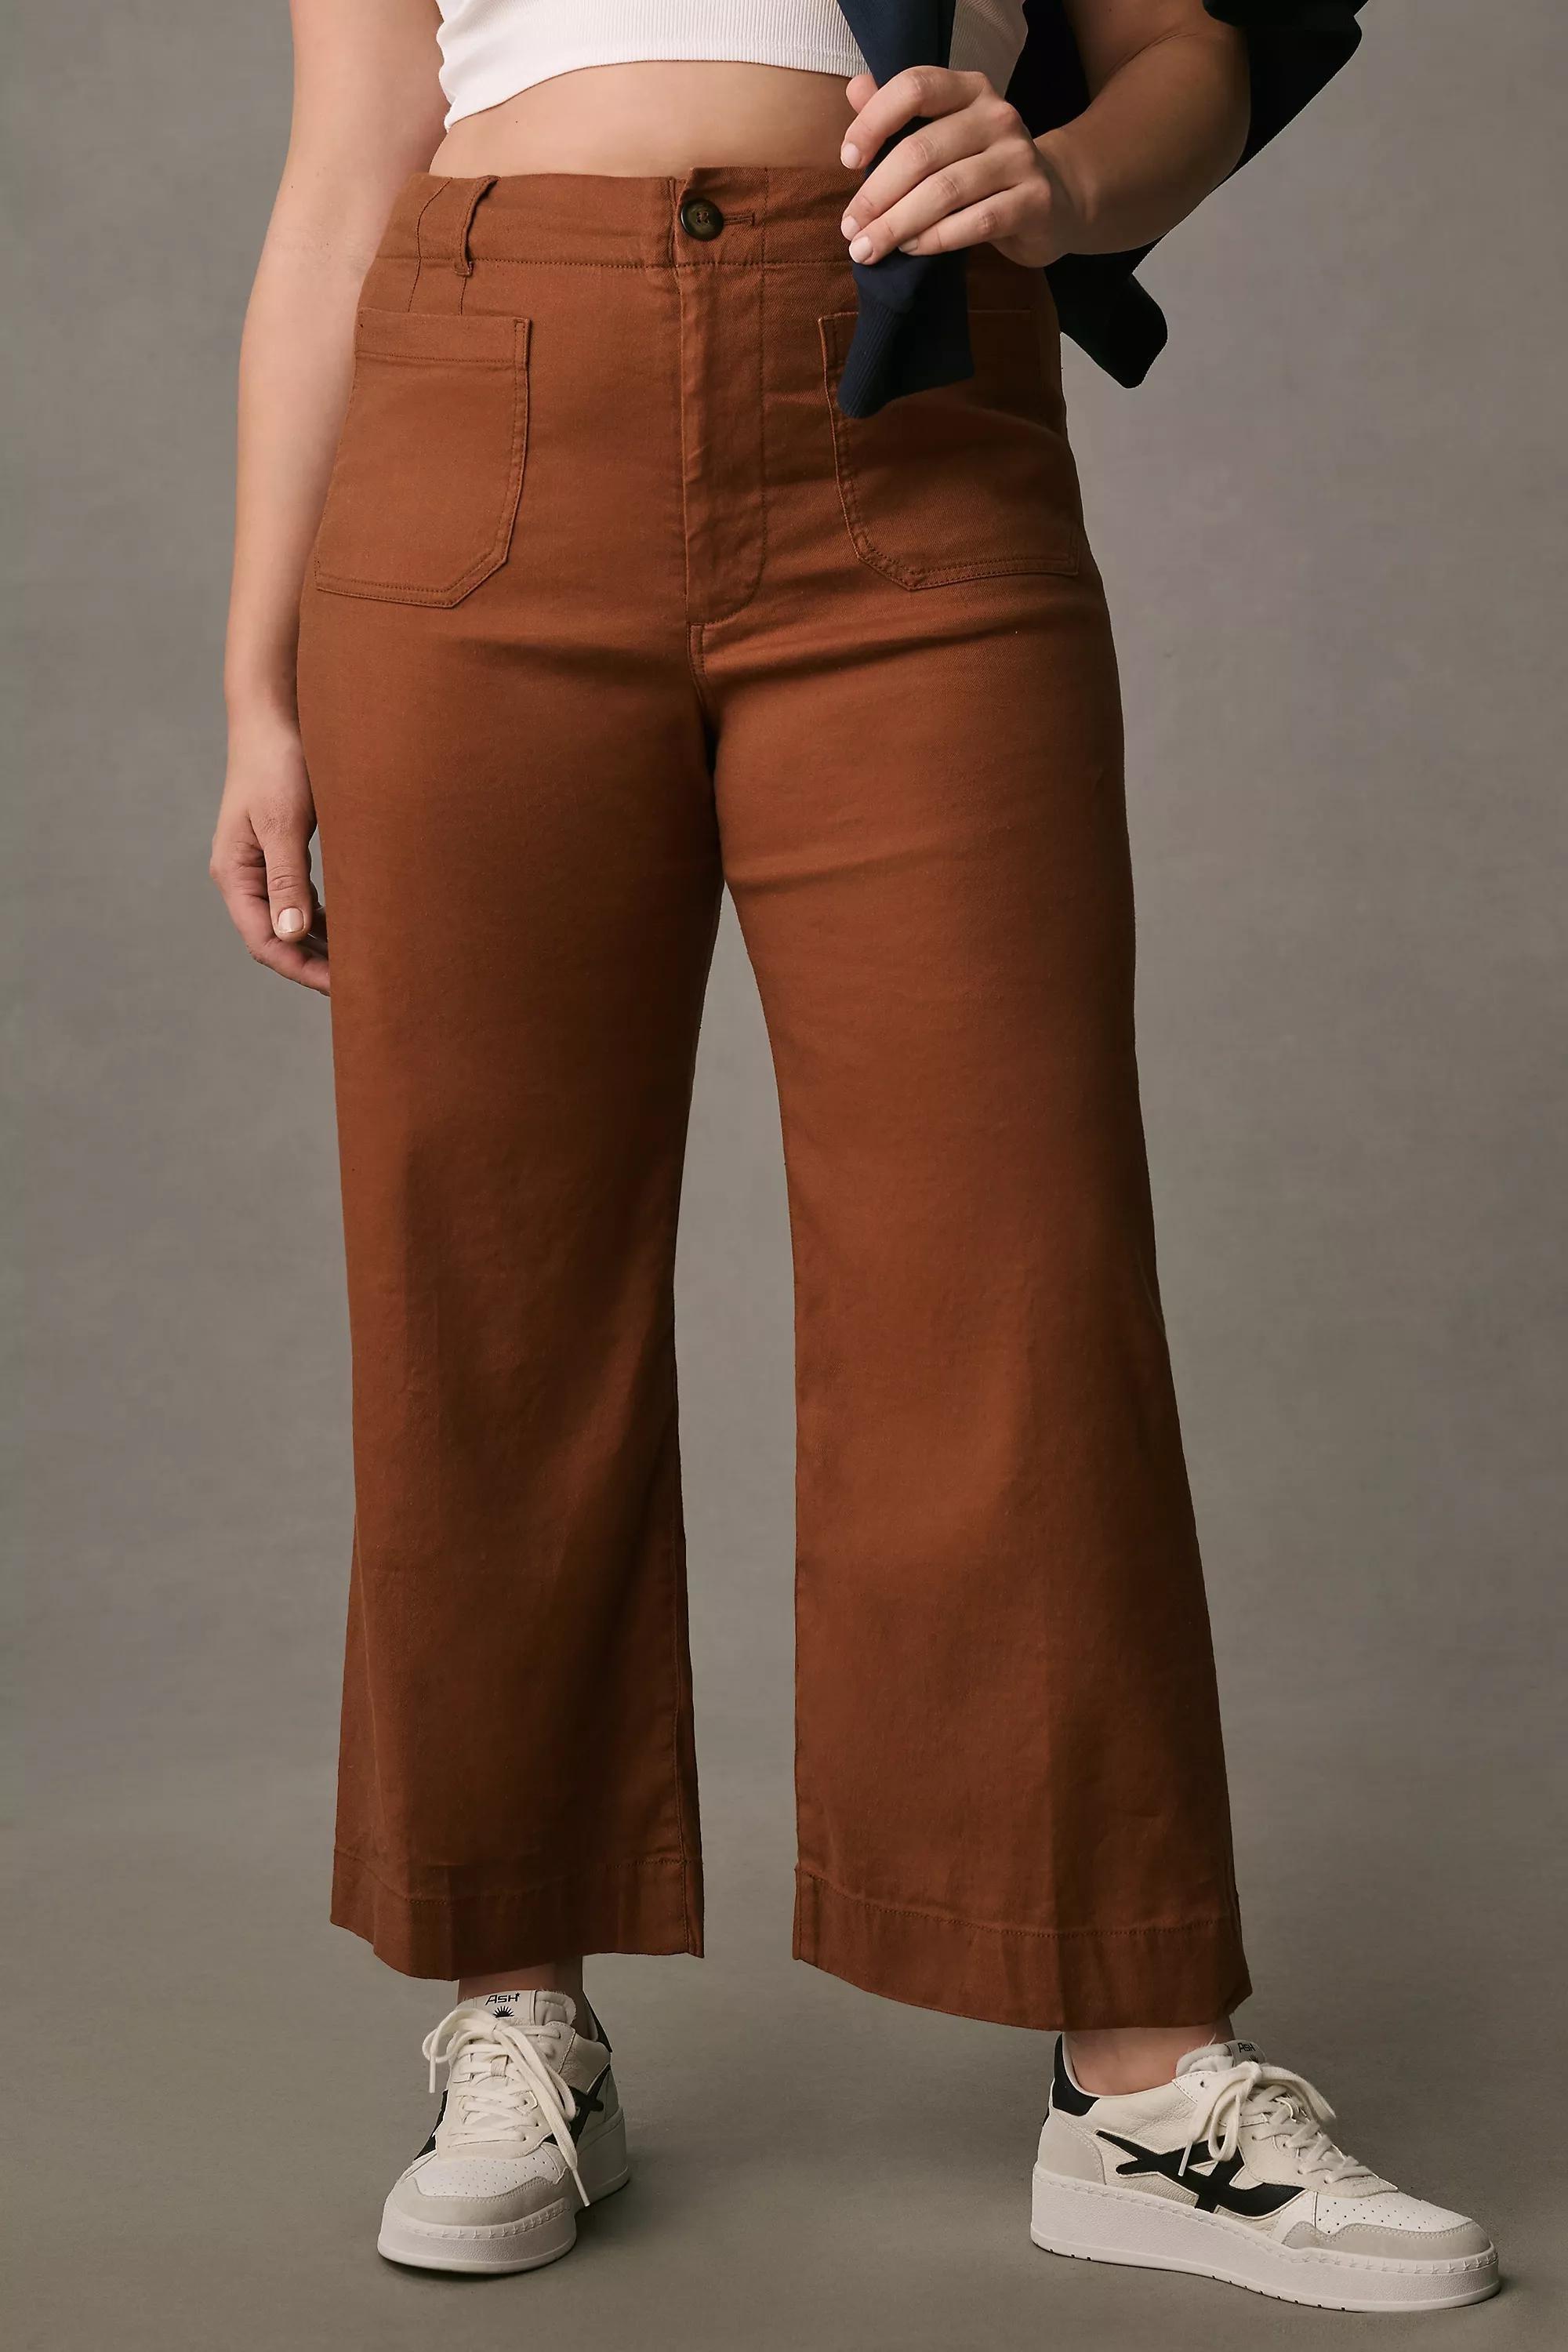 Anthropologie - Maeve The Colette Cropped Wide-Leg Linen Trousers, Brown